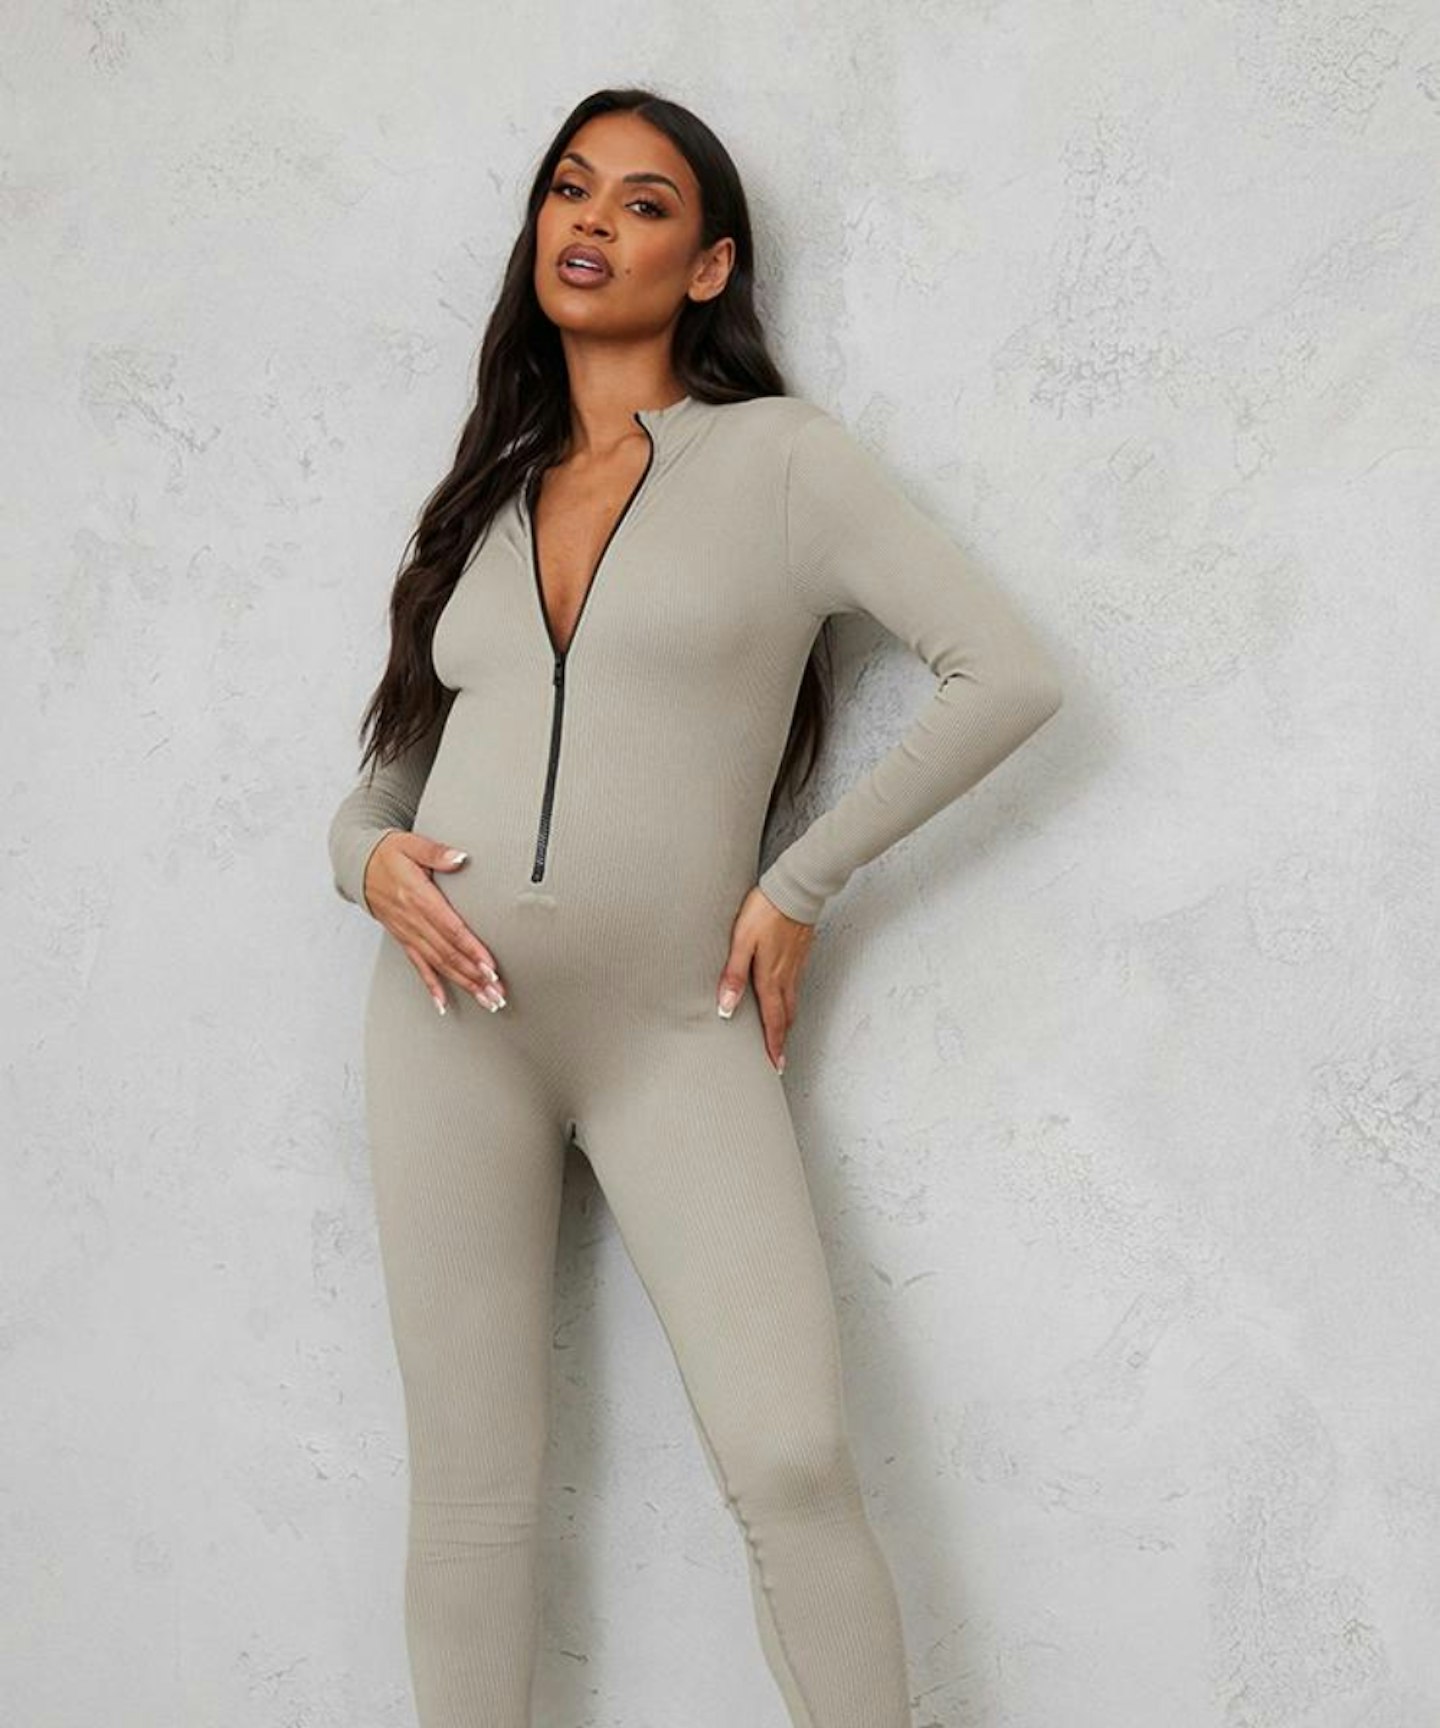 PrettyLittleThing Maternity Jumpsuit In Moss Grey